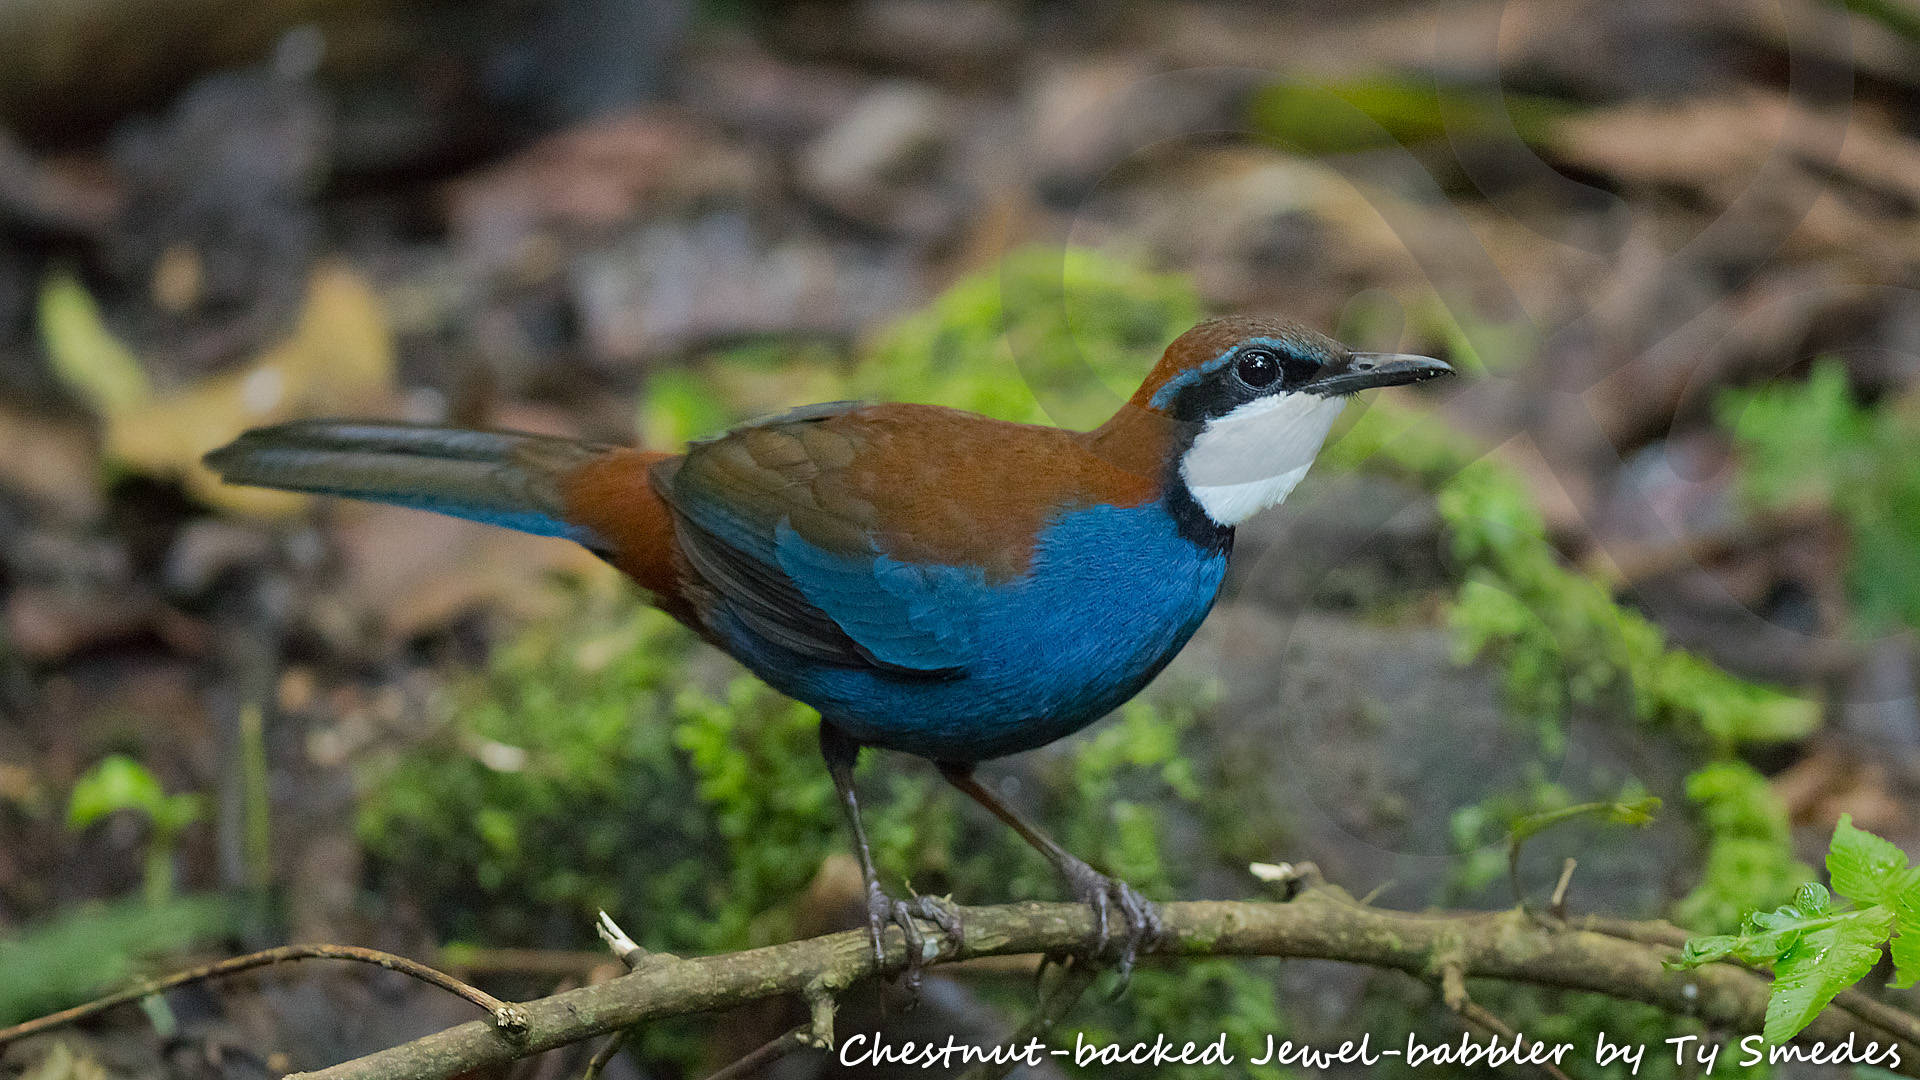 The gorgeous Chestnut-backed Jewel-babbler Ptilorrhoa castanonota is a denizen of New Guinea's hill and lower montane forests that can be seen on our 'Amazing Arfak' birding expedition. Copyright © Ty Smedes